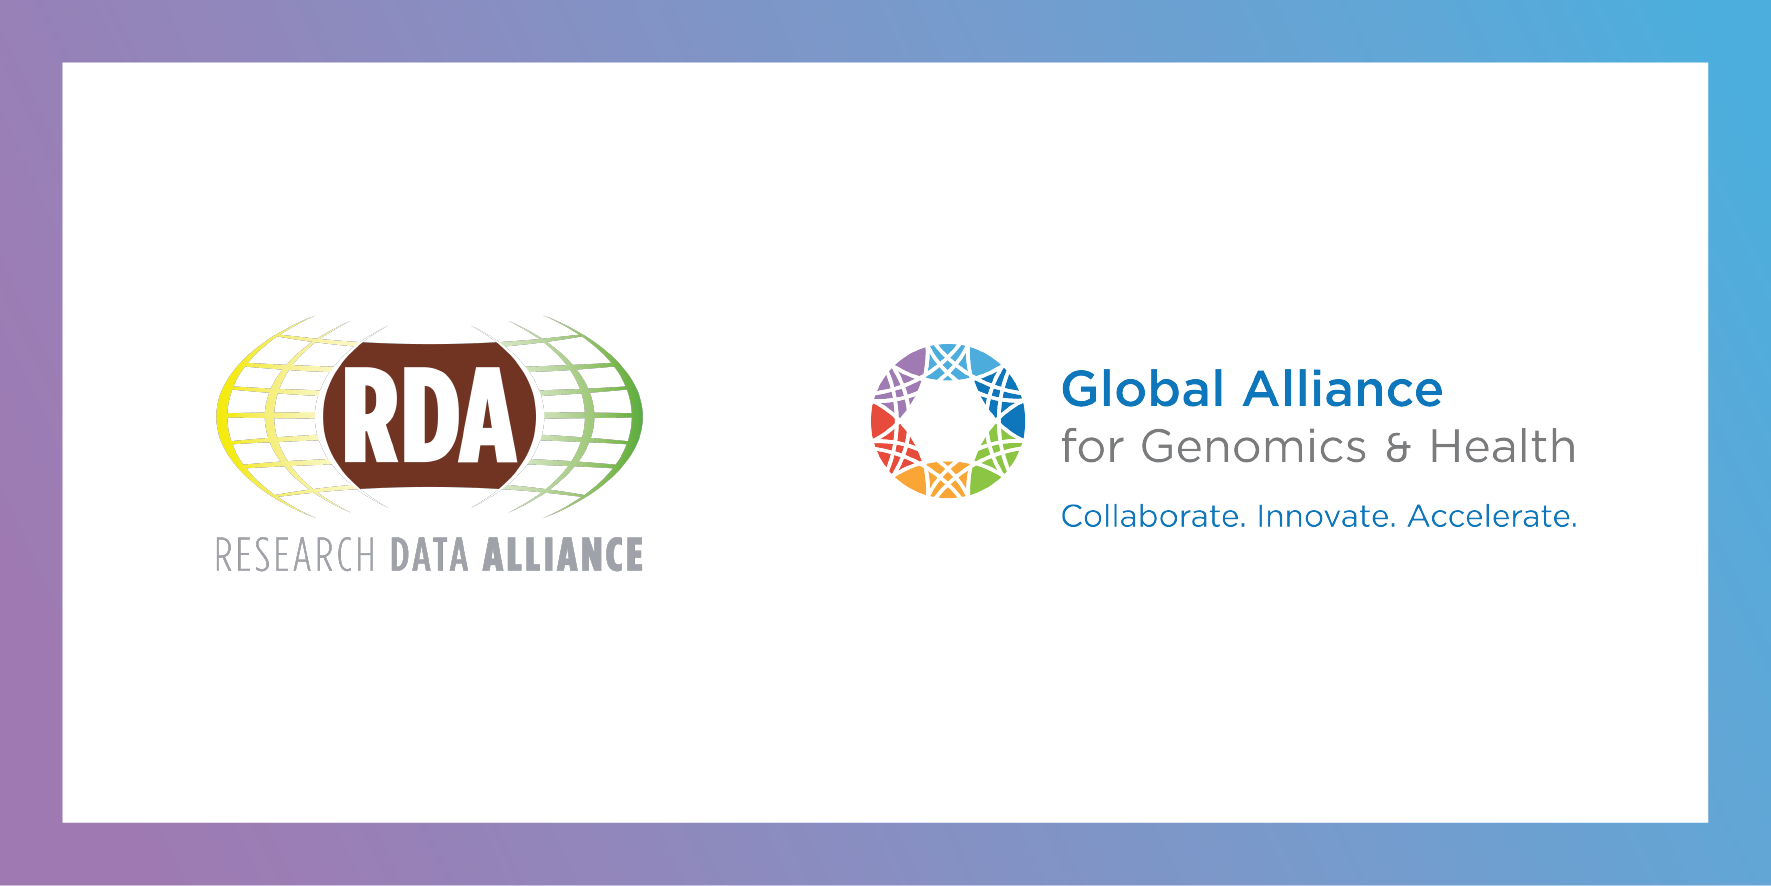 Logos for the Research Data Alliance (RDA) and GA4GH, which are forming a strategic relationship